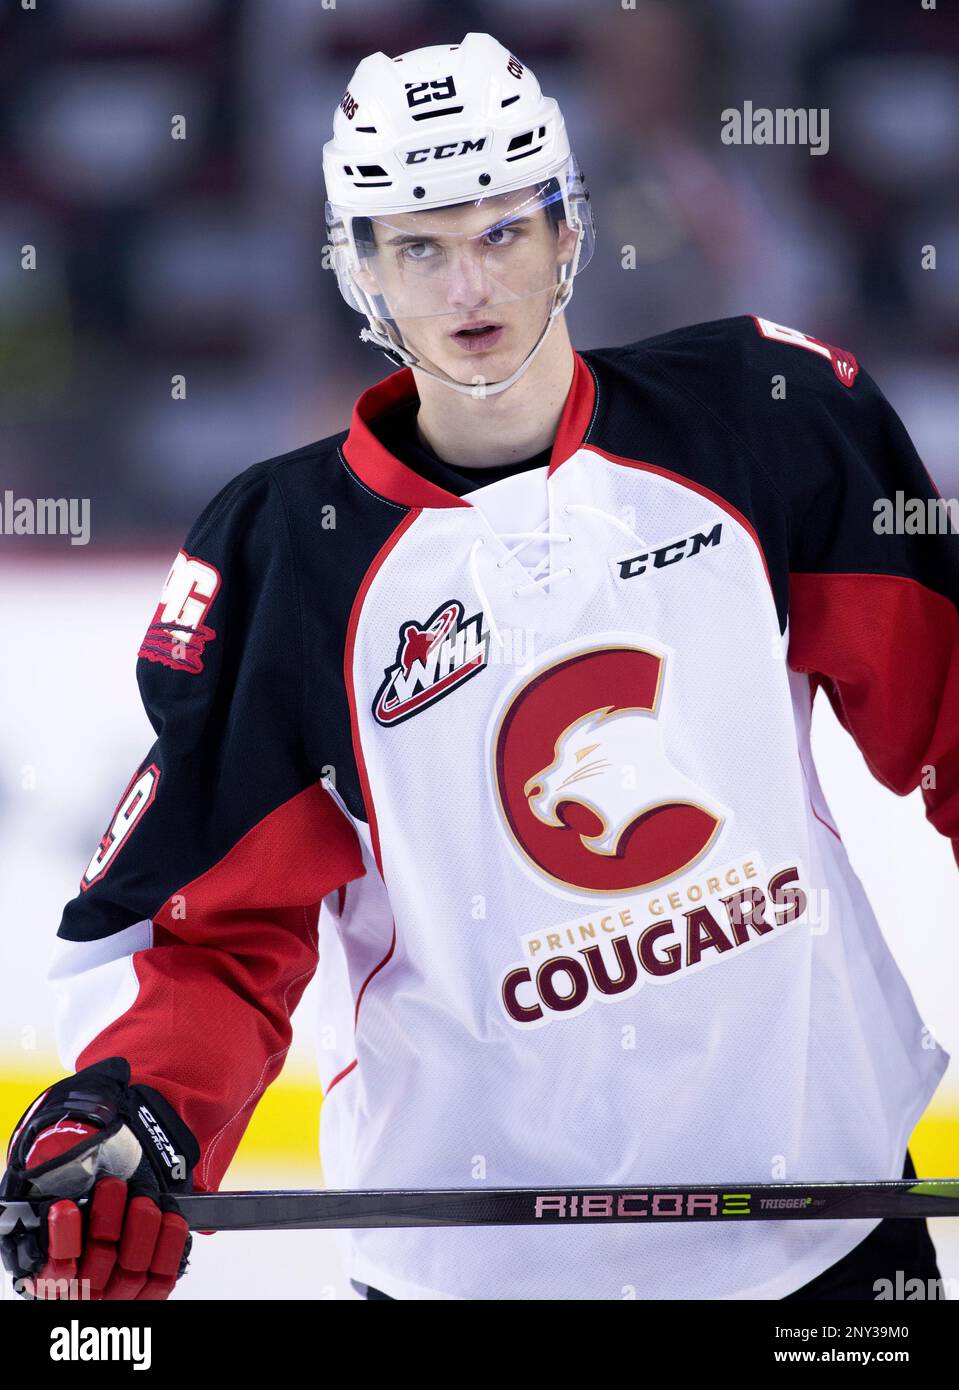 WHL (Western Hockey League) player profile photo on Prince George Cougars player Vladislav Mikhalchuk, from Belarus, at a game against the Calgary Hitmen in Calgary, Alta. on Oct